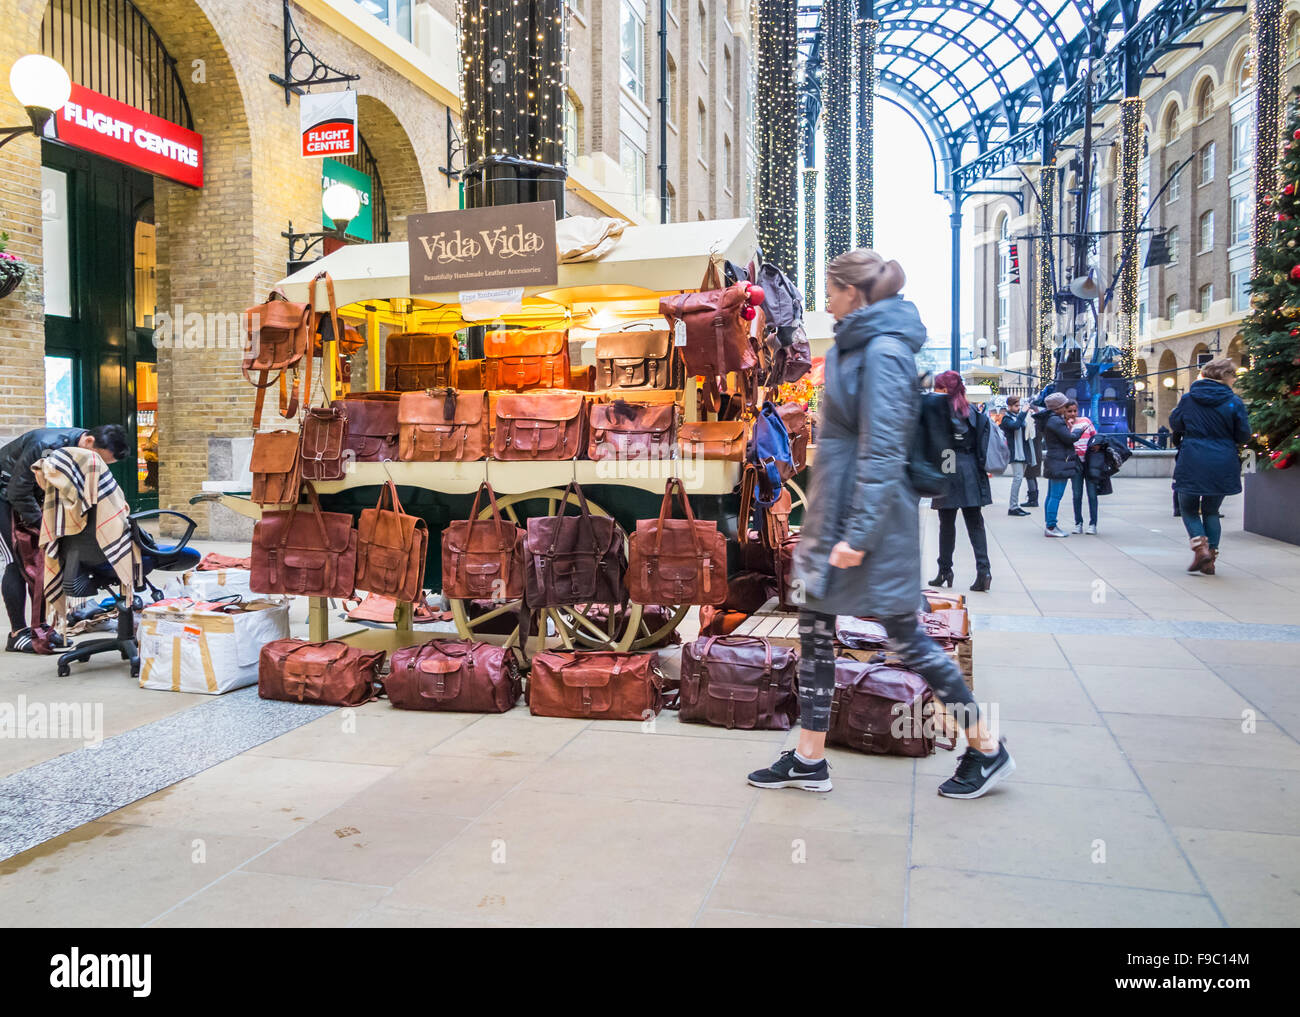 Stall selling leather handbags and satchels in the indoor Christmas market stalls in Hays Galleria, More London, Southwark SE1 Stock Photo